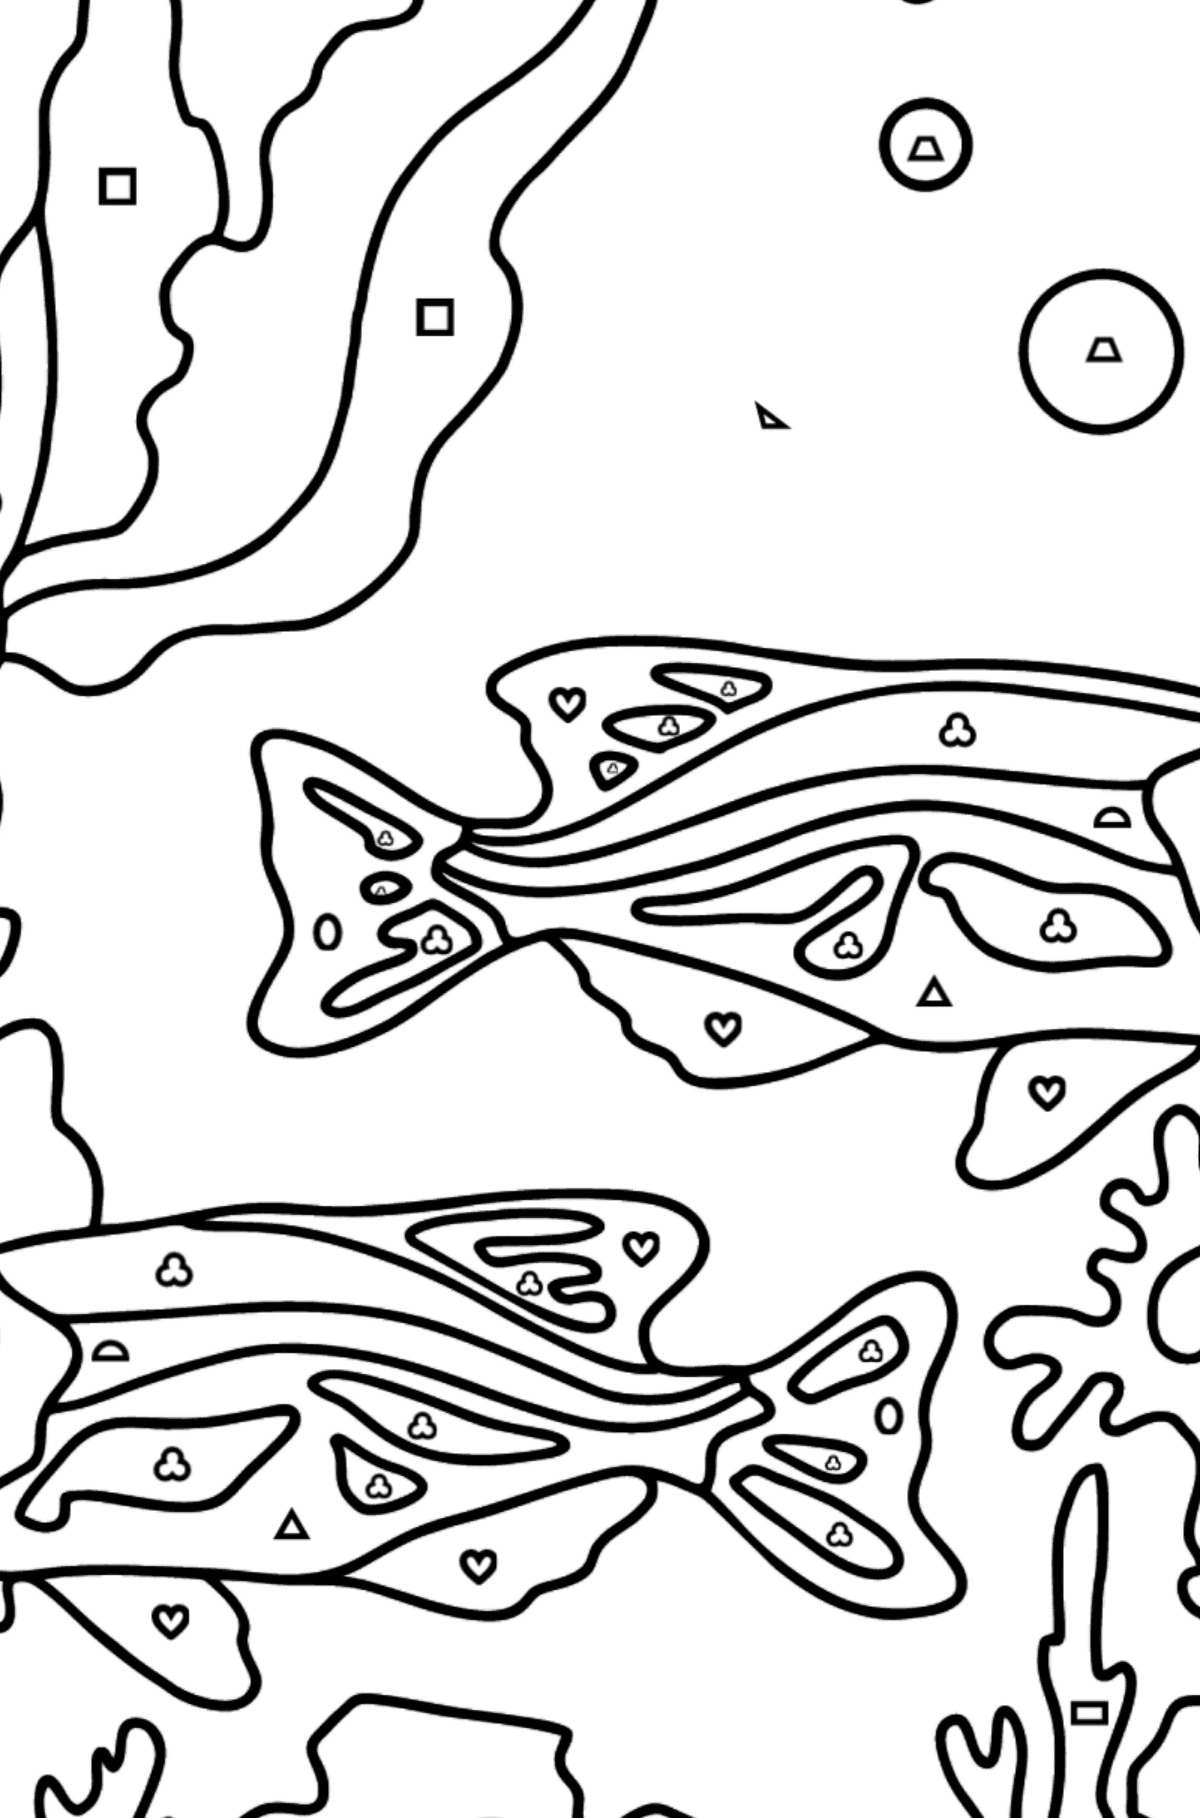 Two Fish Coloring Page - Fish are Swimming Beautifully - Coloring by Geometric Shapes for Kids